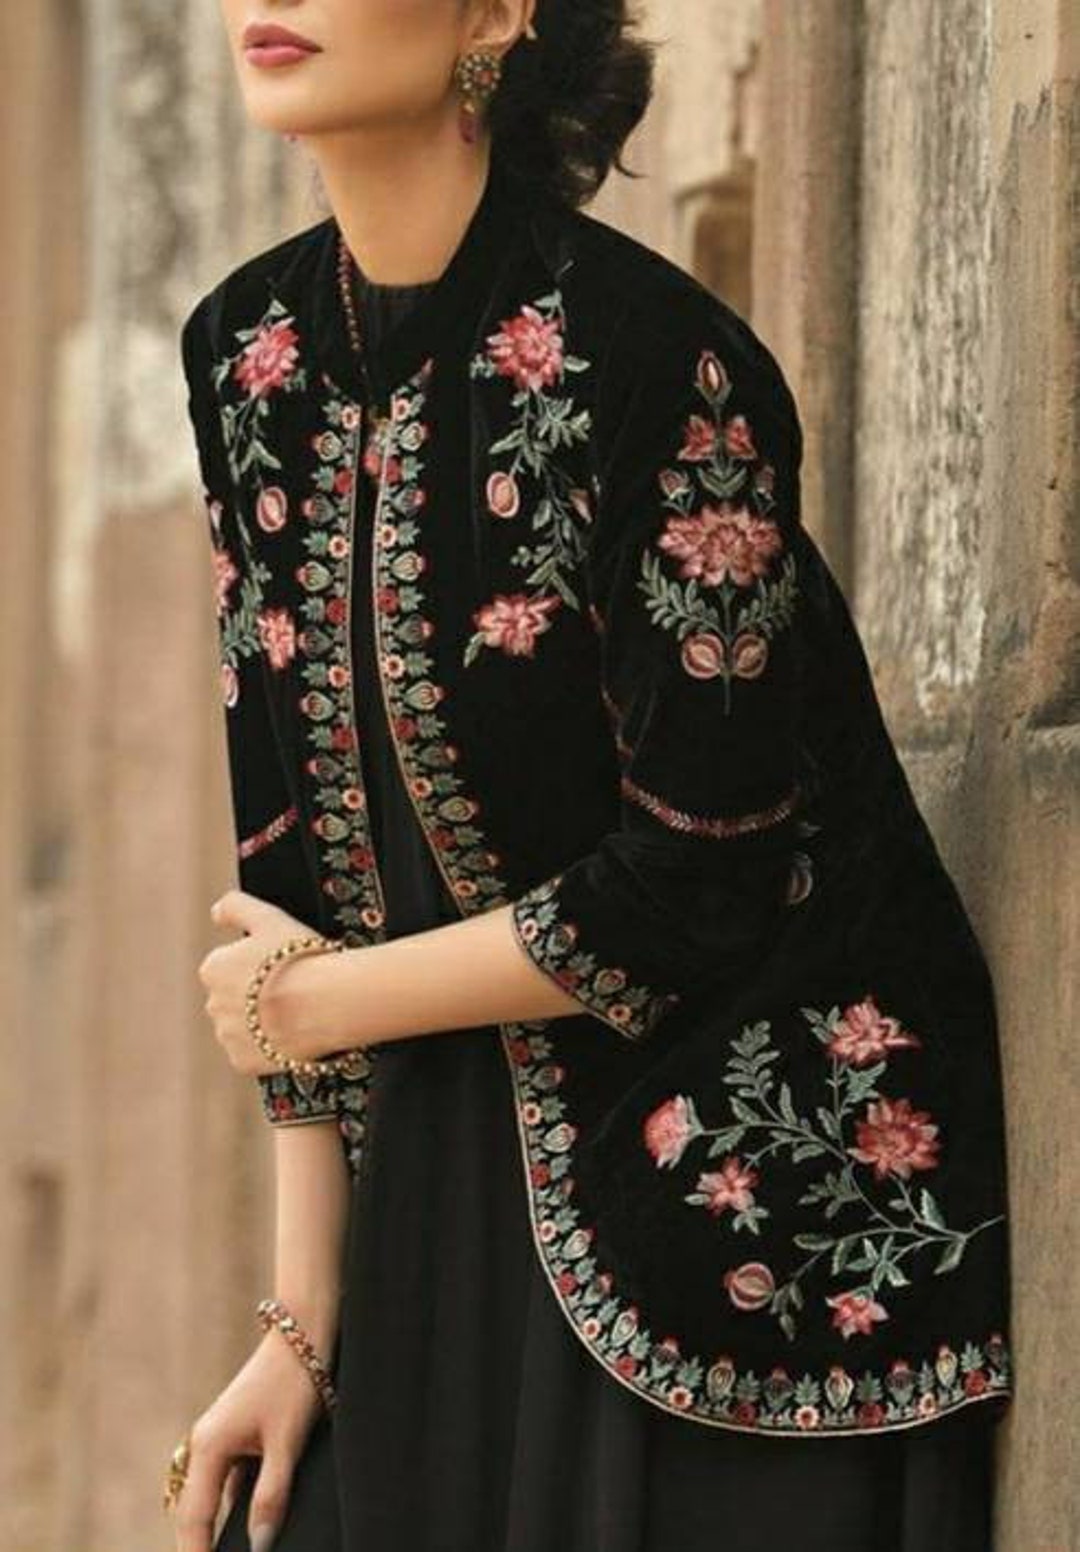 Multicolor Embroidery on Ladies Jacket - Size - S Length - 19 in.